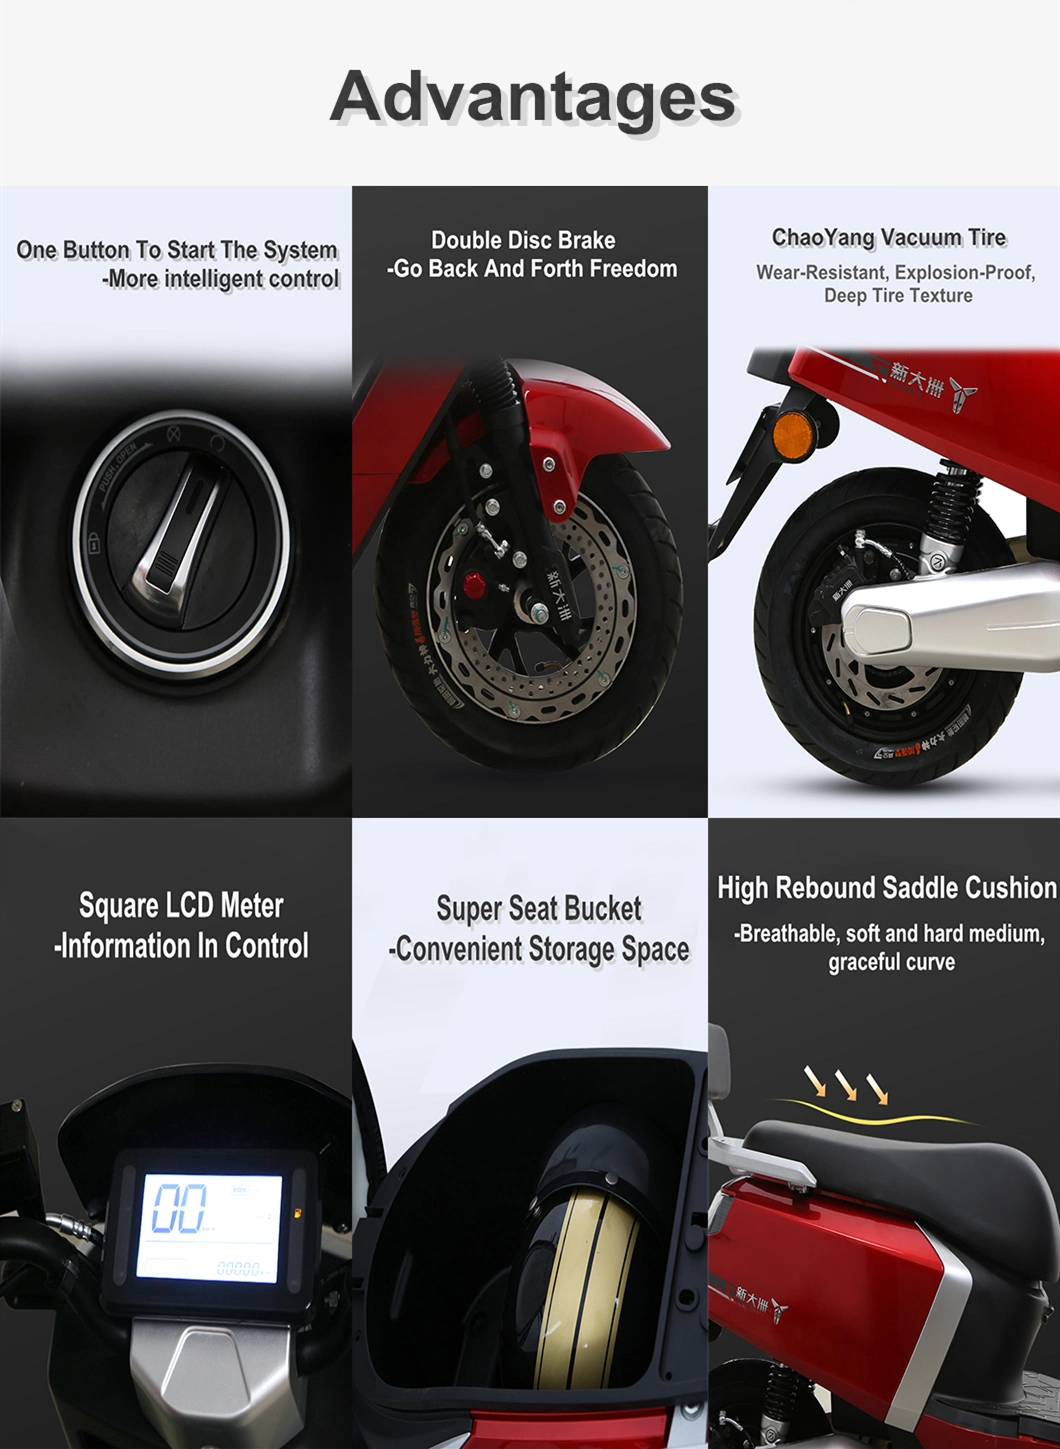 500W/800W Motor Lithium Battery Electric Motorcycle/Big Power Electric Bike for Fast Food Delivery